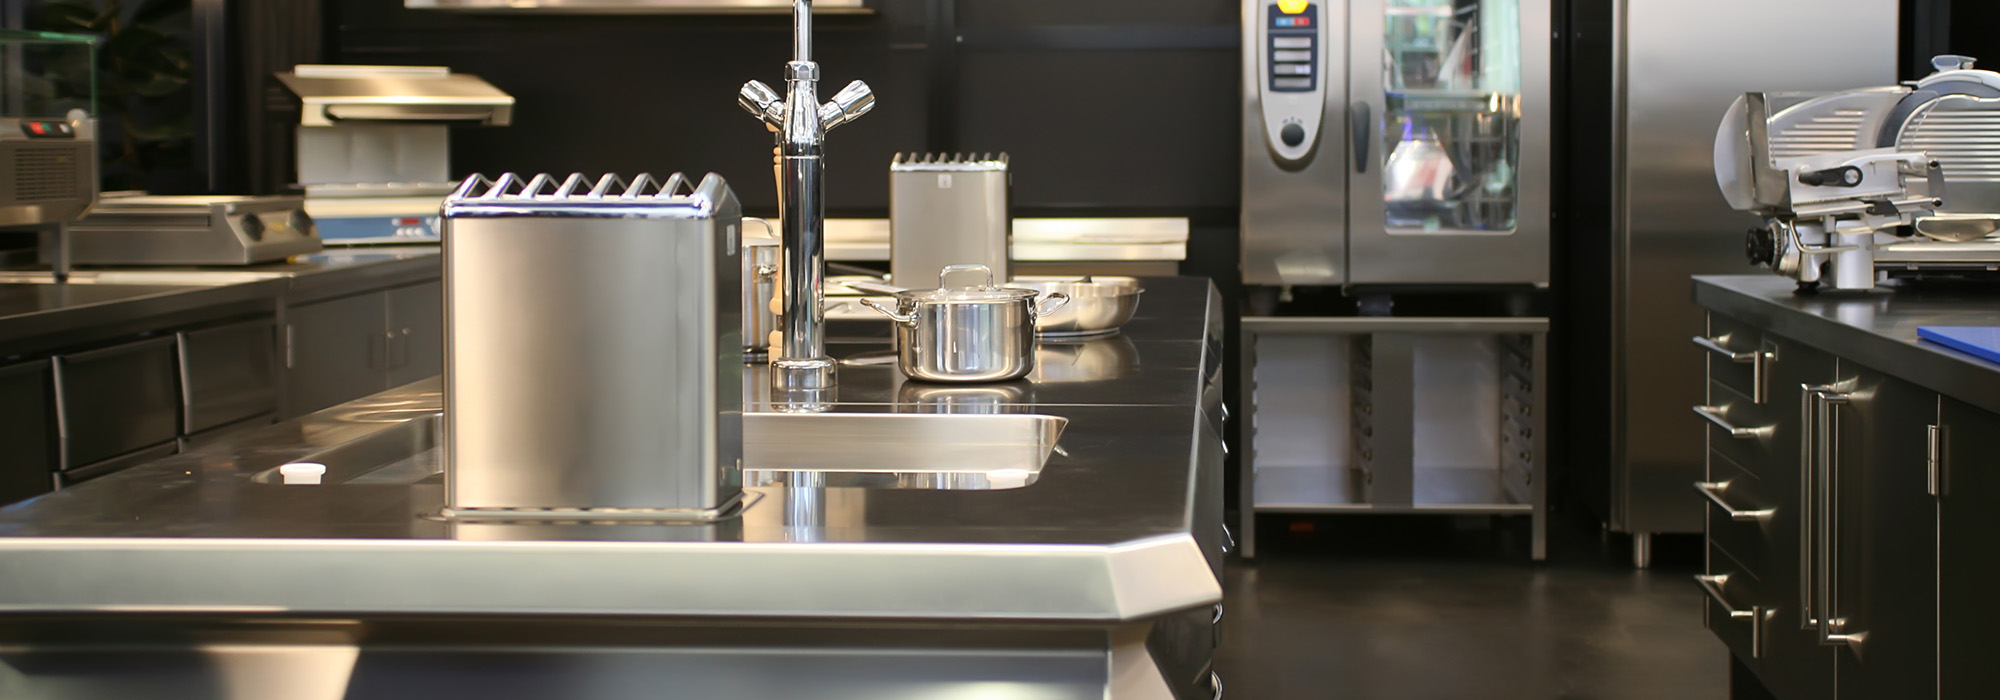 PROFESSIONAL STAINLESS STEEL CATERING EQUIPMENT